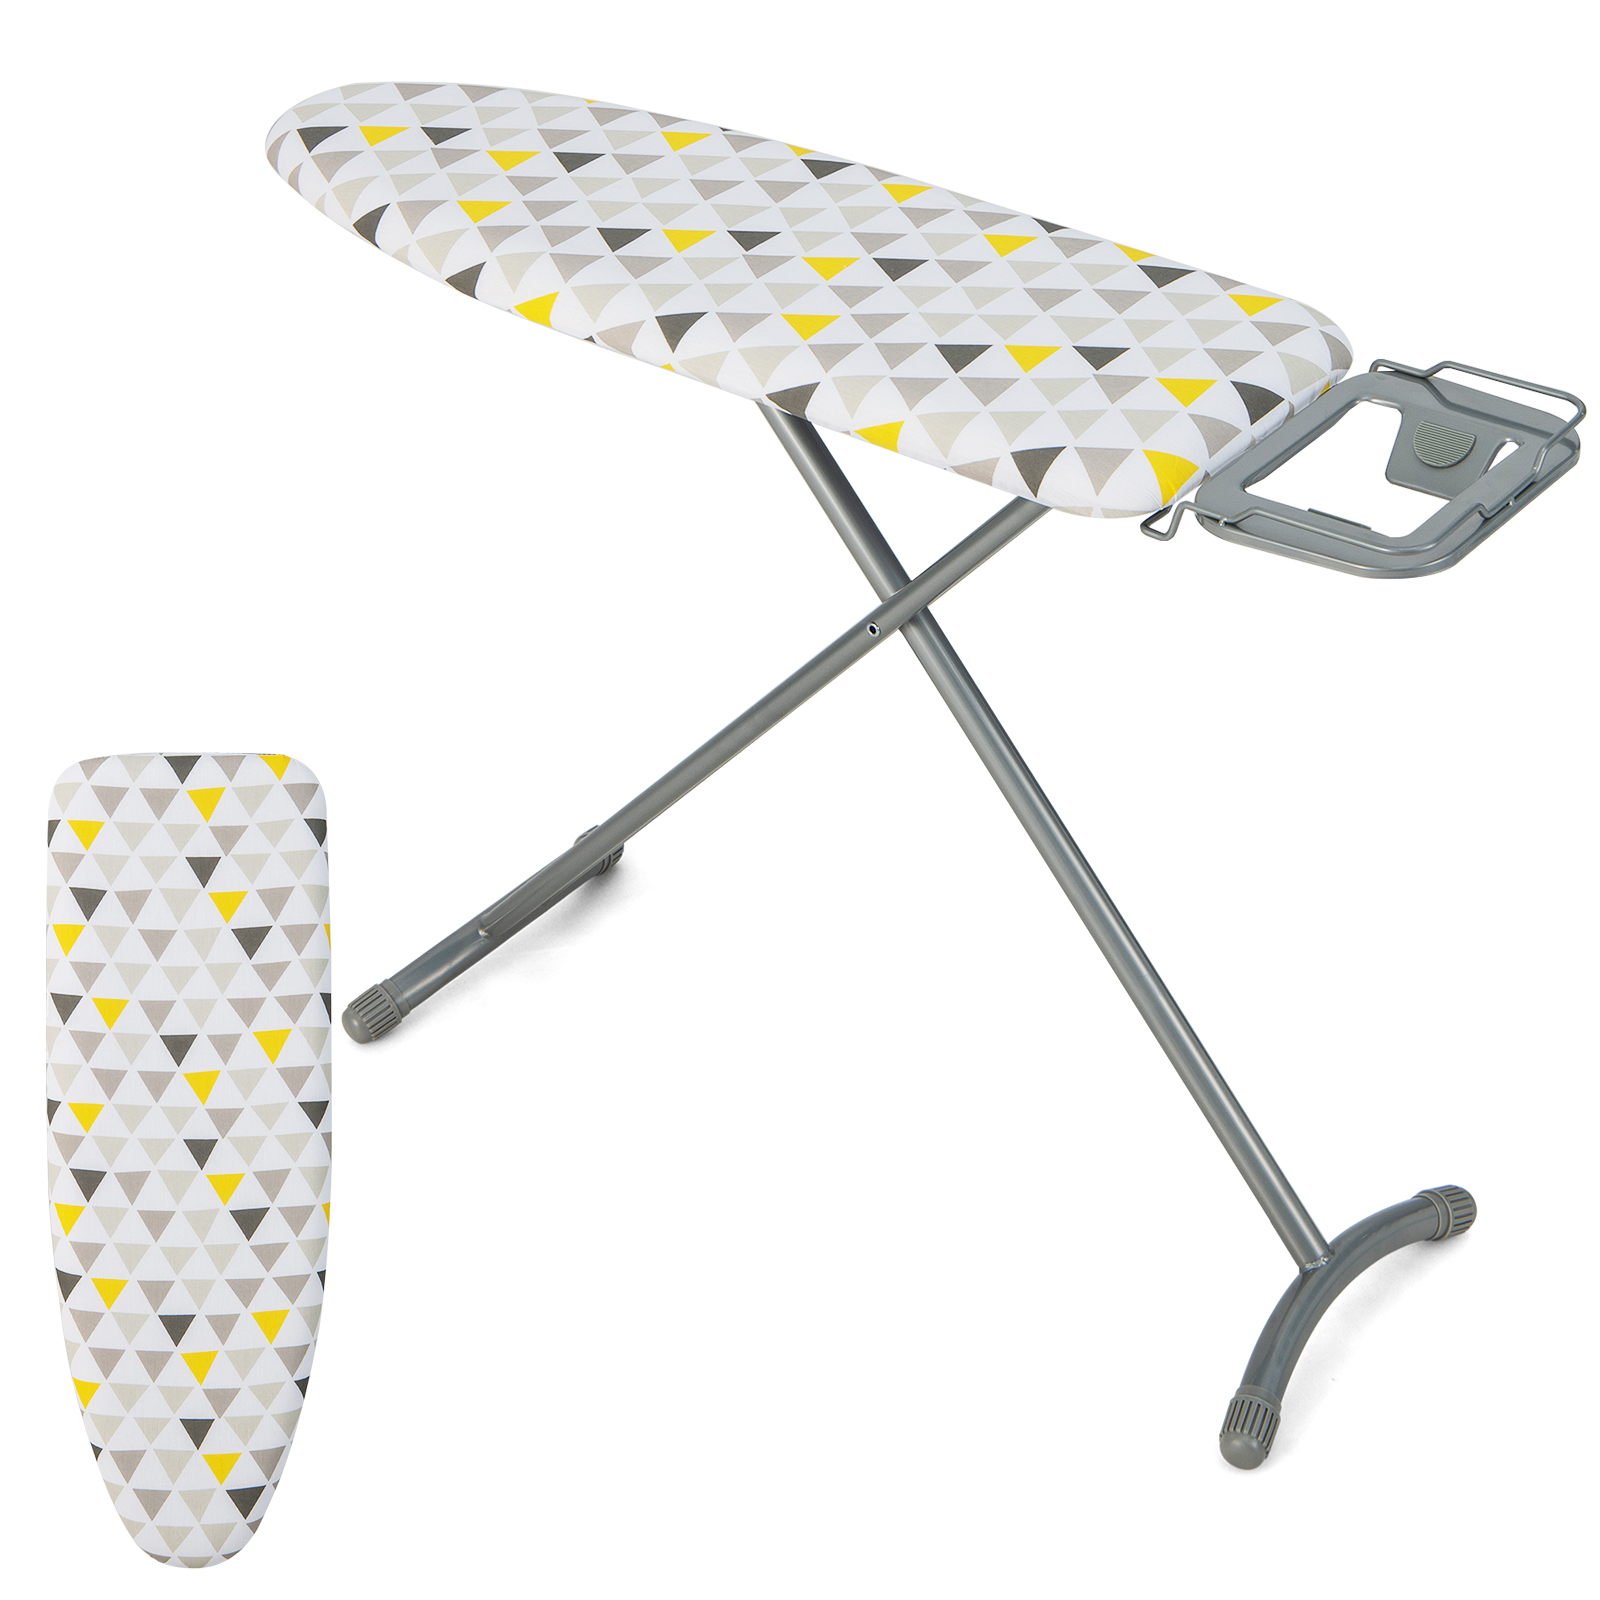 Foldable Ironing Board with Iron Rest Extra Cotton Cover-White